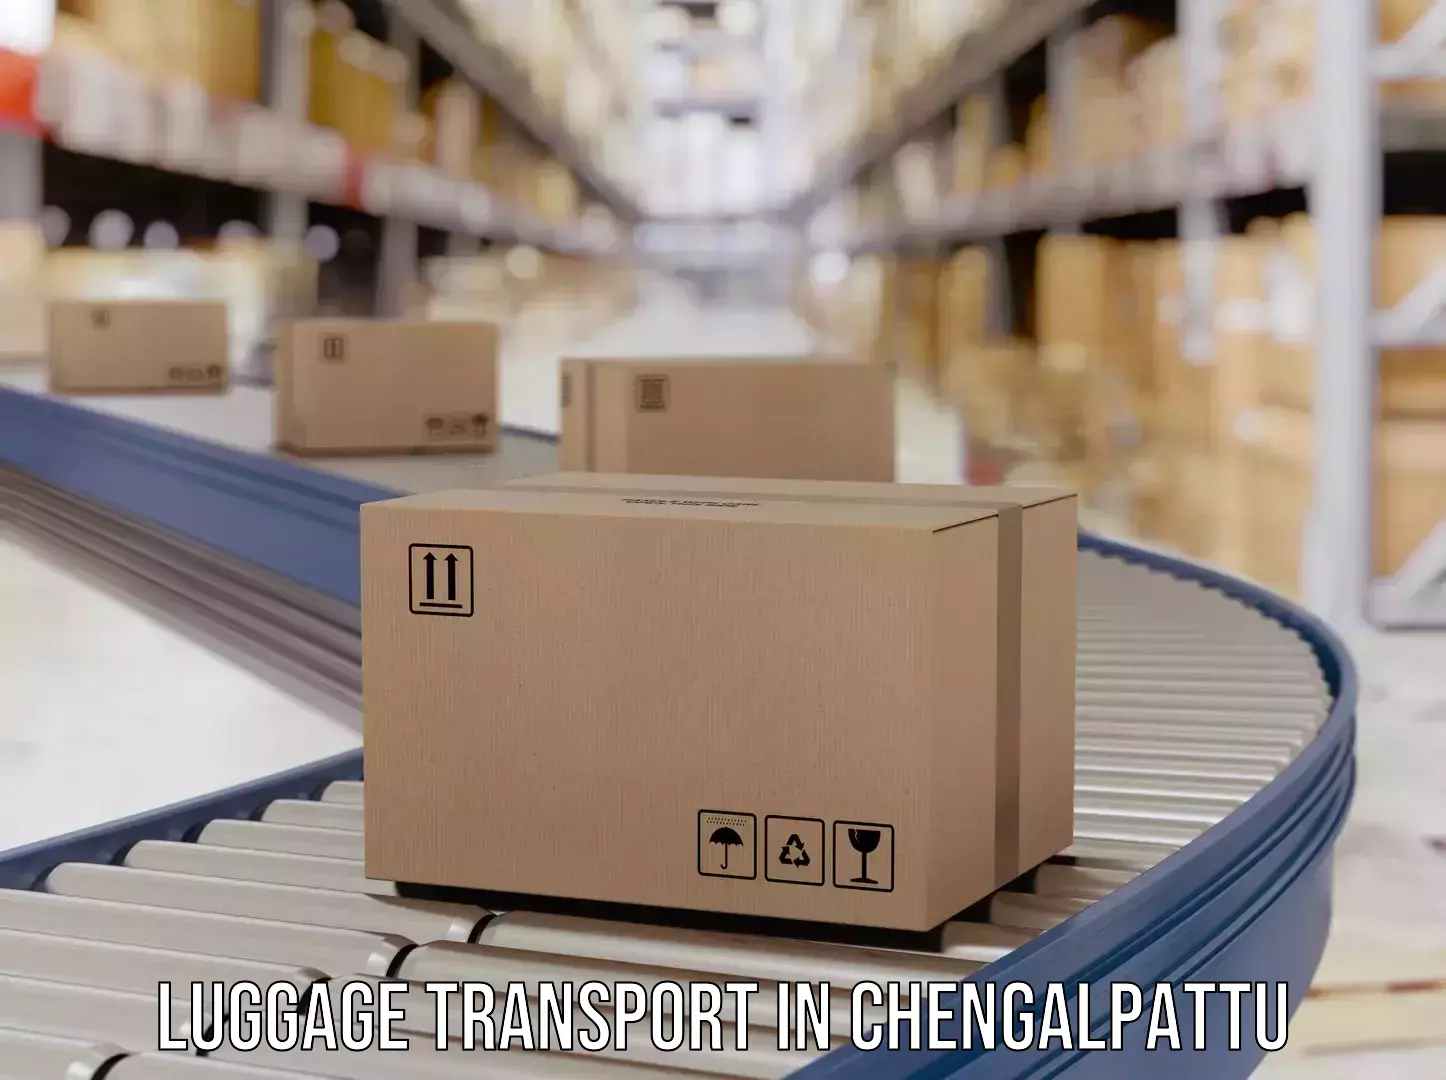 Baggage delivery support in Chengalpattu